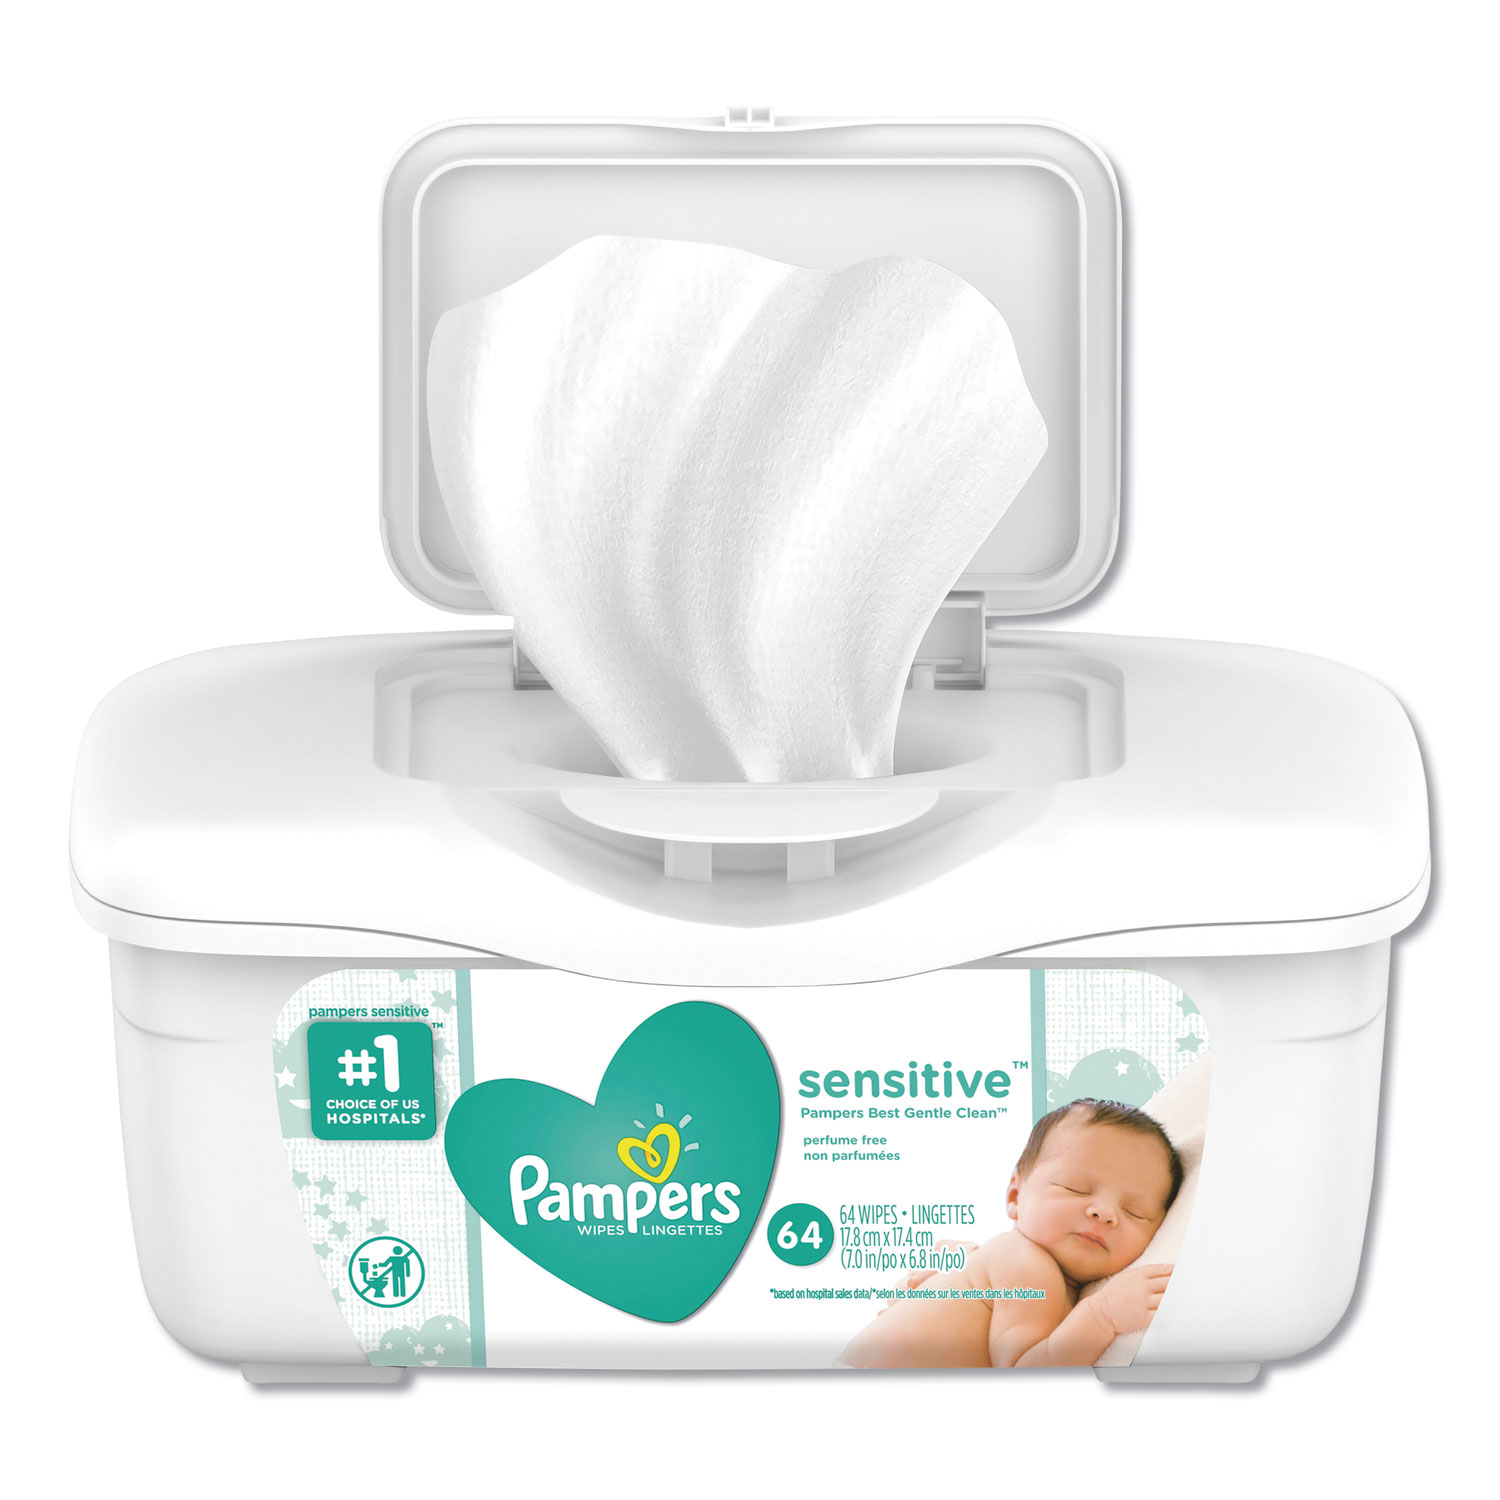  Pampers 19505EA Sensitive Baby Wipes, White, Cotton, Unscented, 64/Tub (PGC19505EA) 